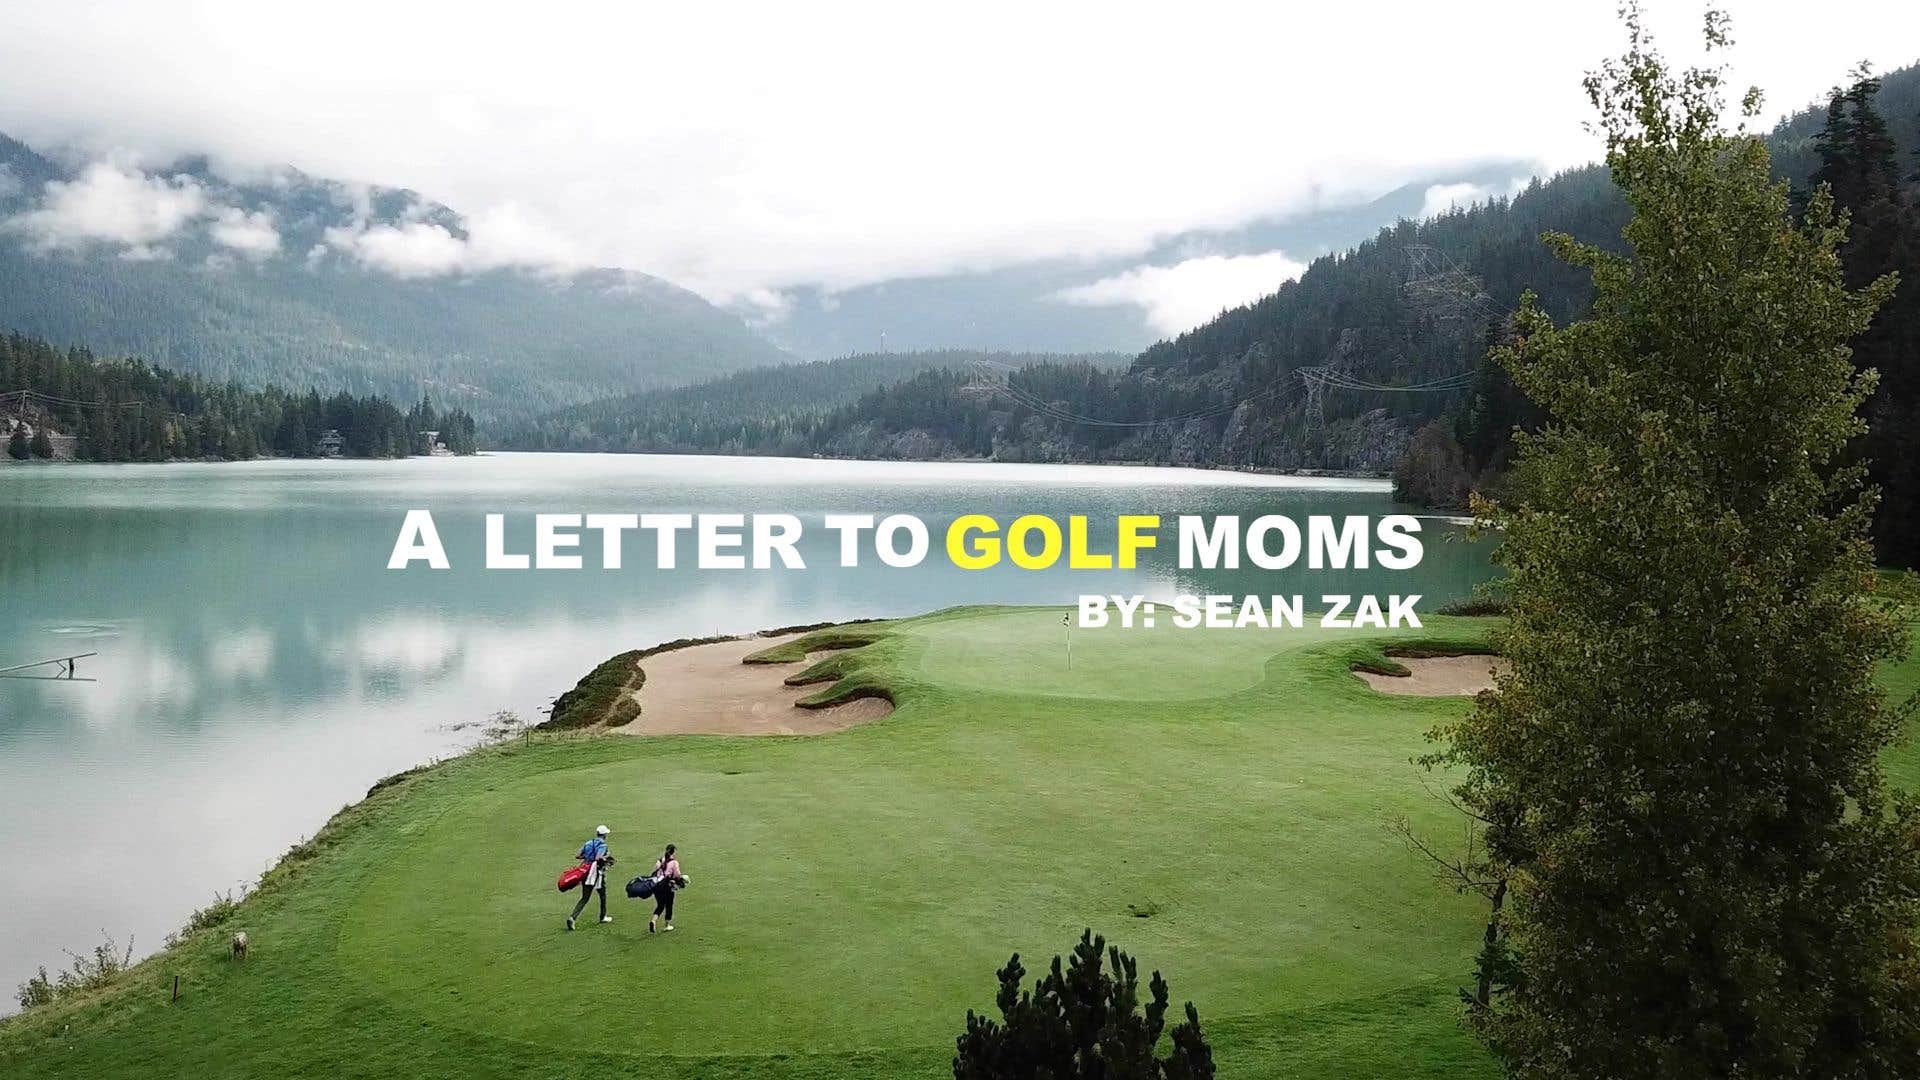 A Letter to Golf Moms